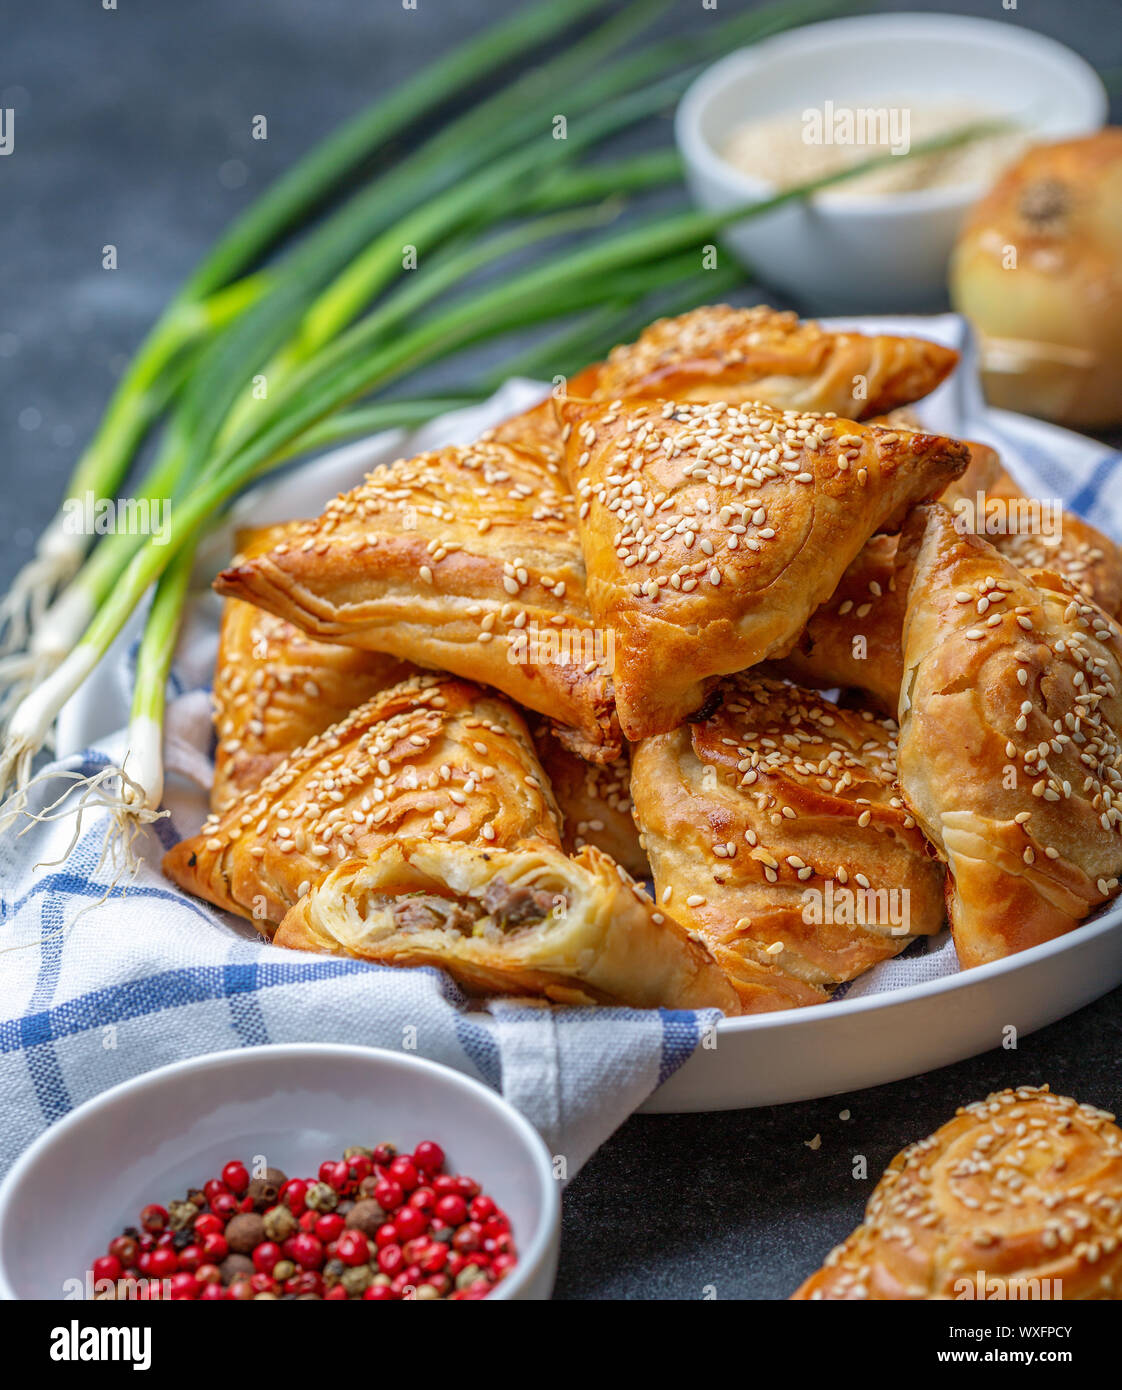 Homemade samosas with meat and spices. Stock Photo